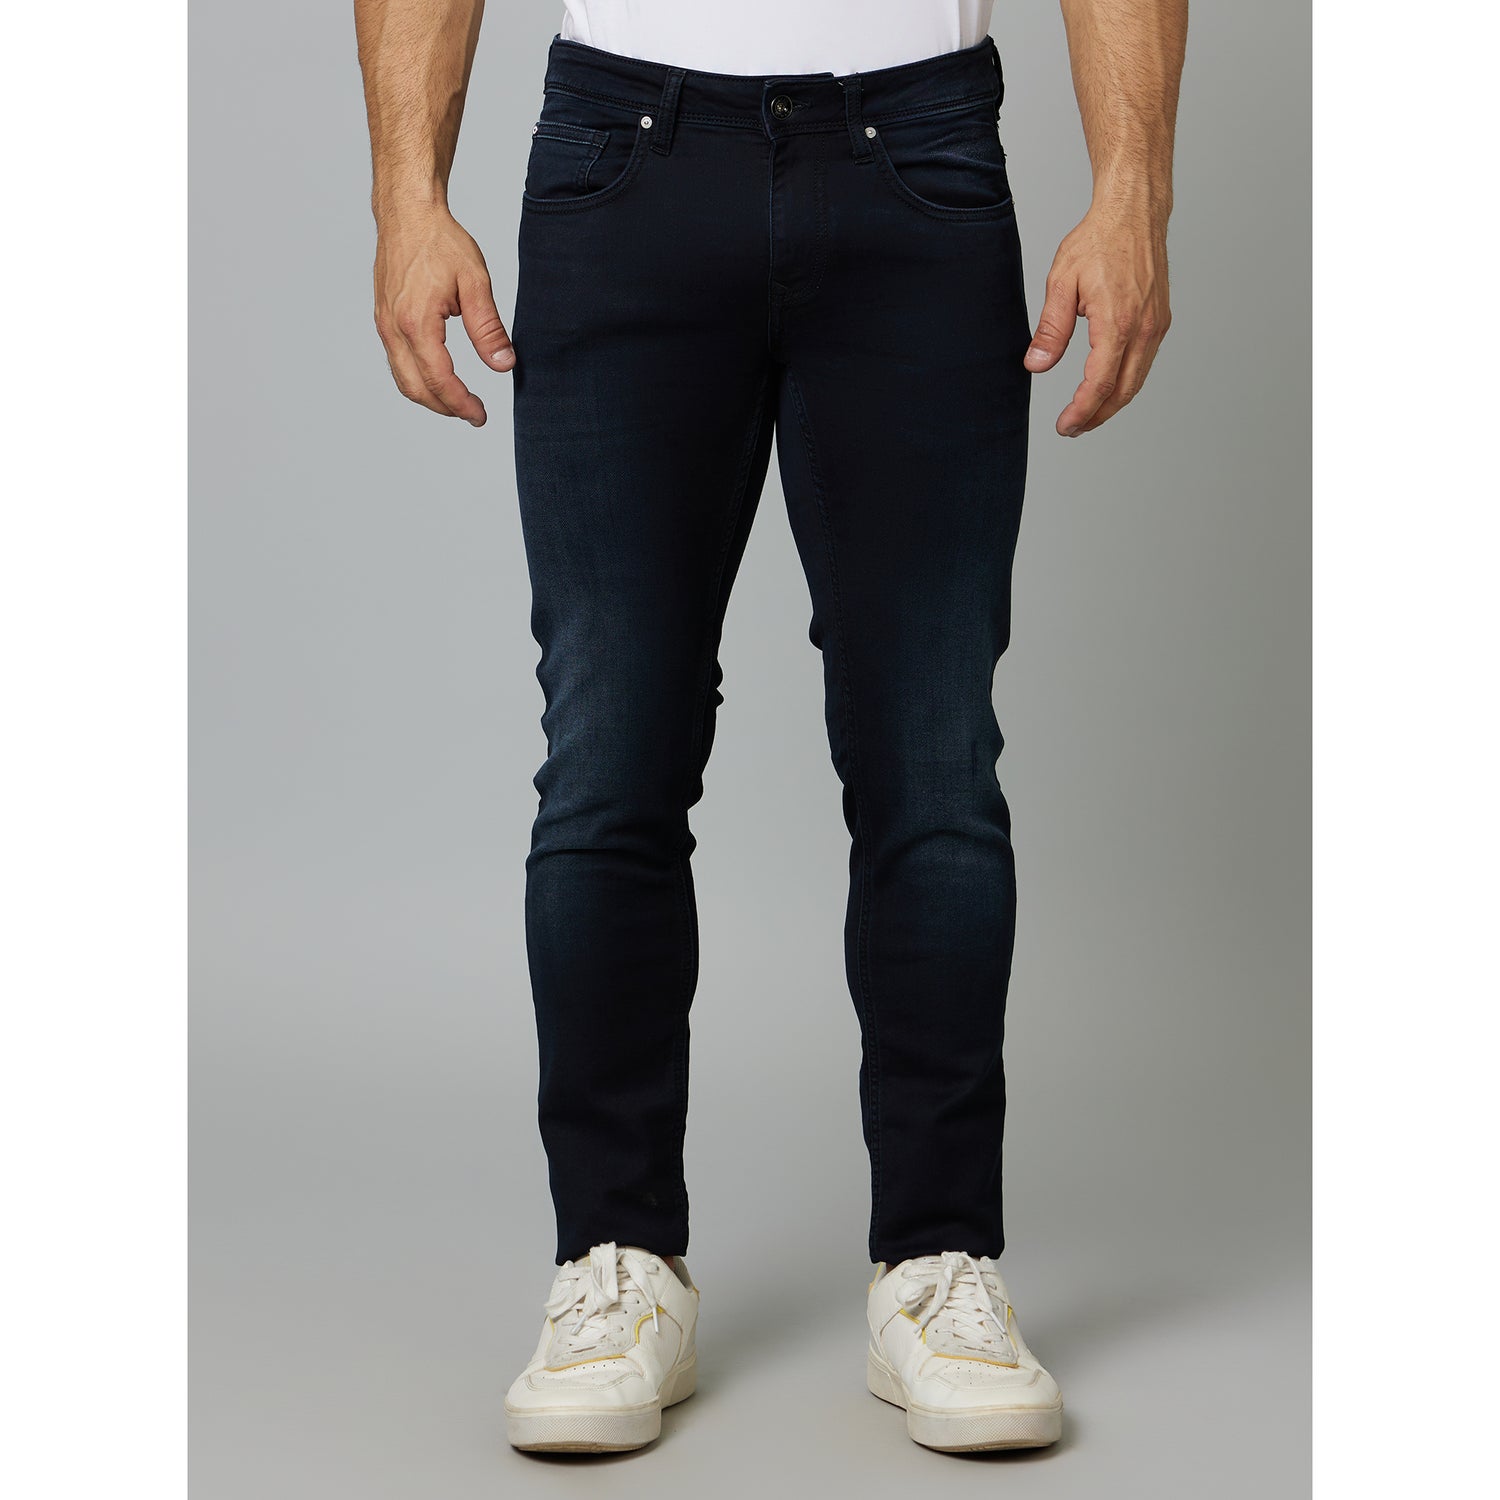 Black Skinny Fit Light Fade Clean Look Stretchable Jeans (DOMELAN45)